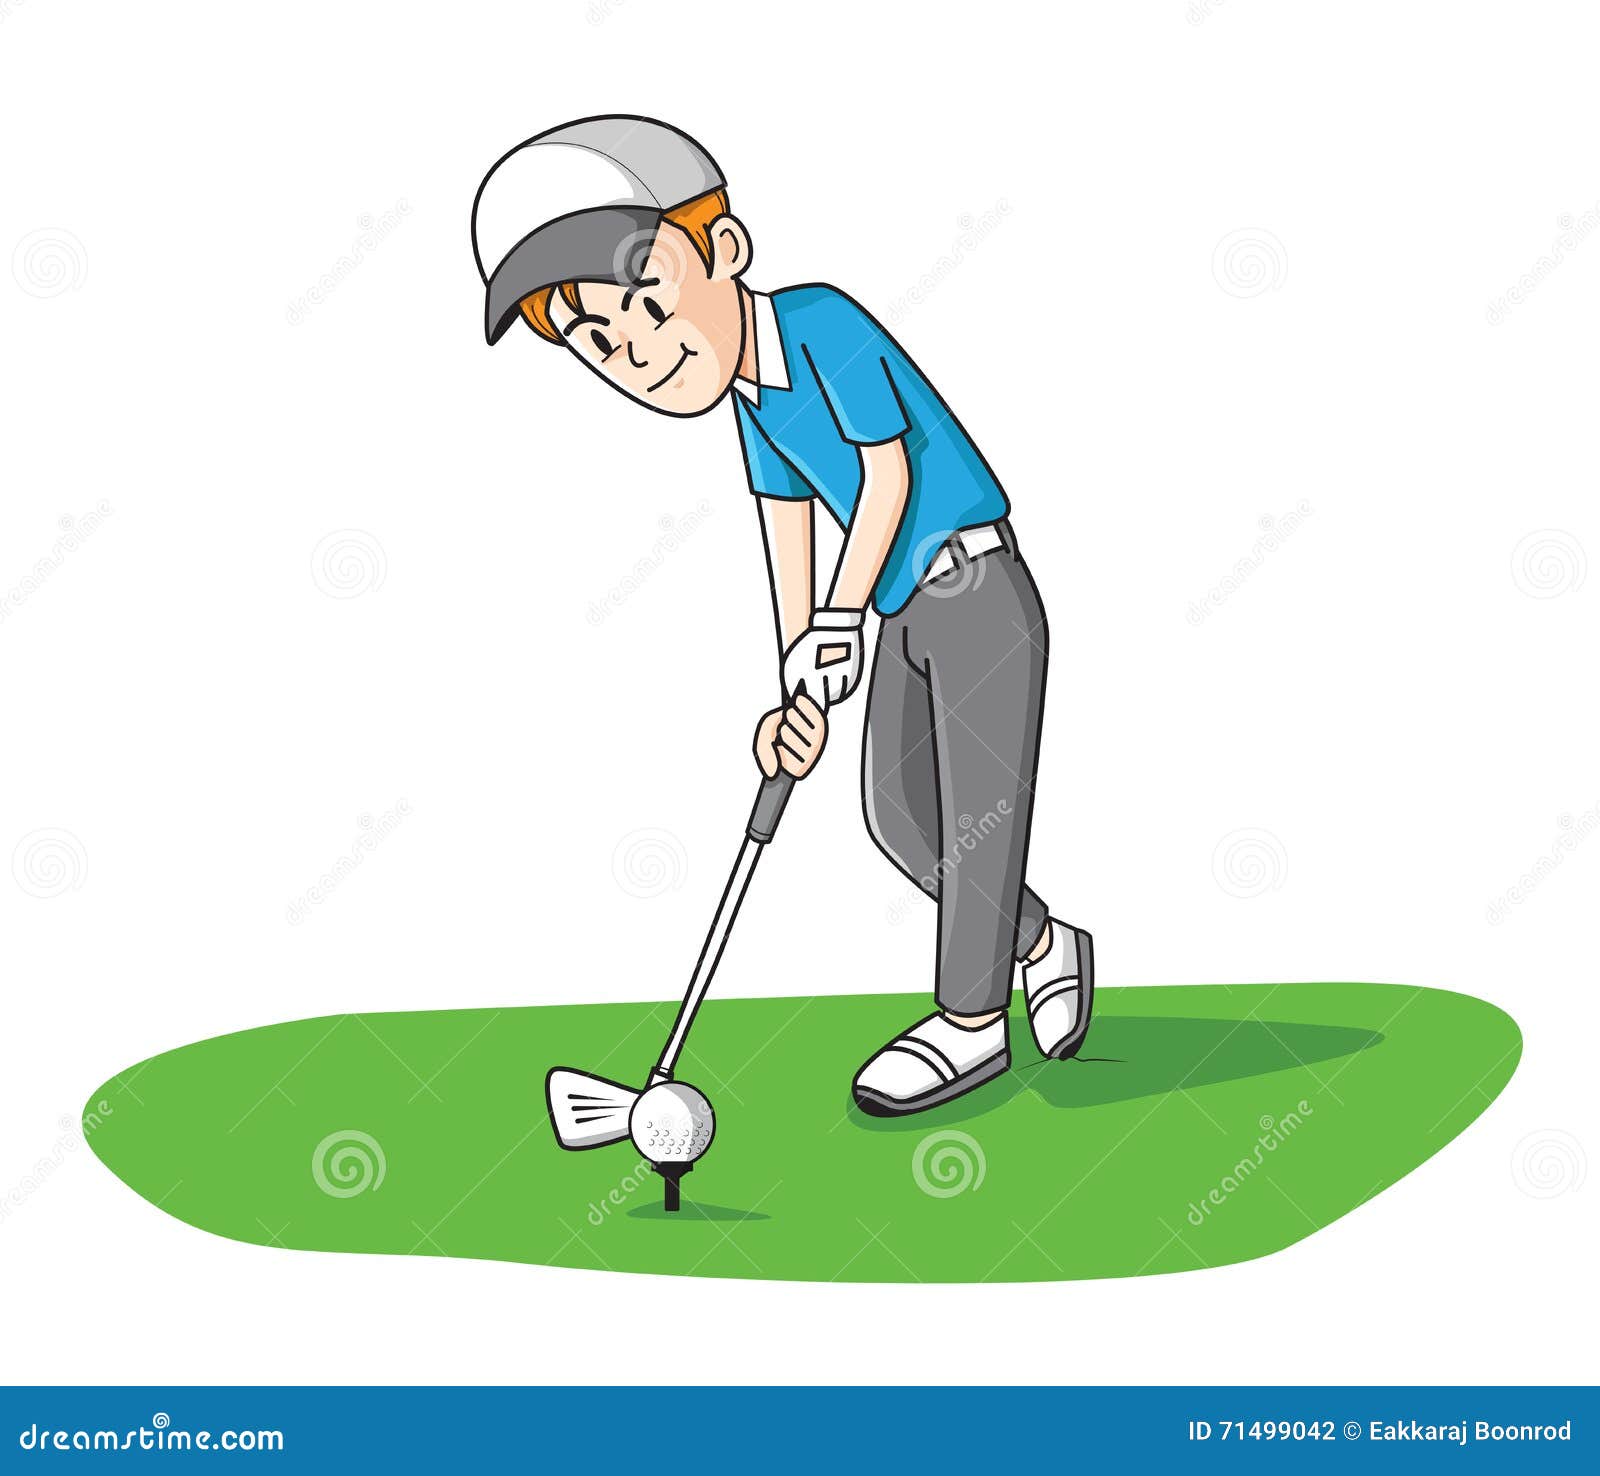 clipart man playing golf - photo #13